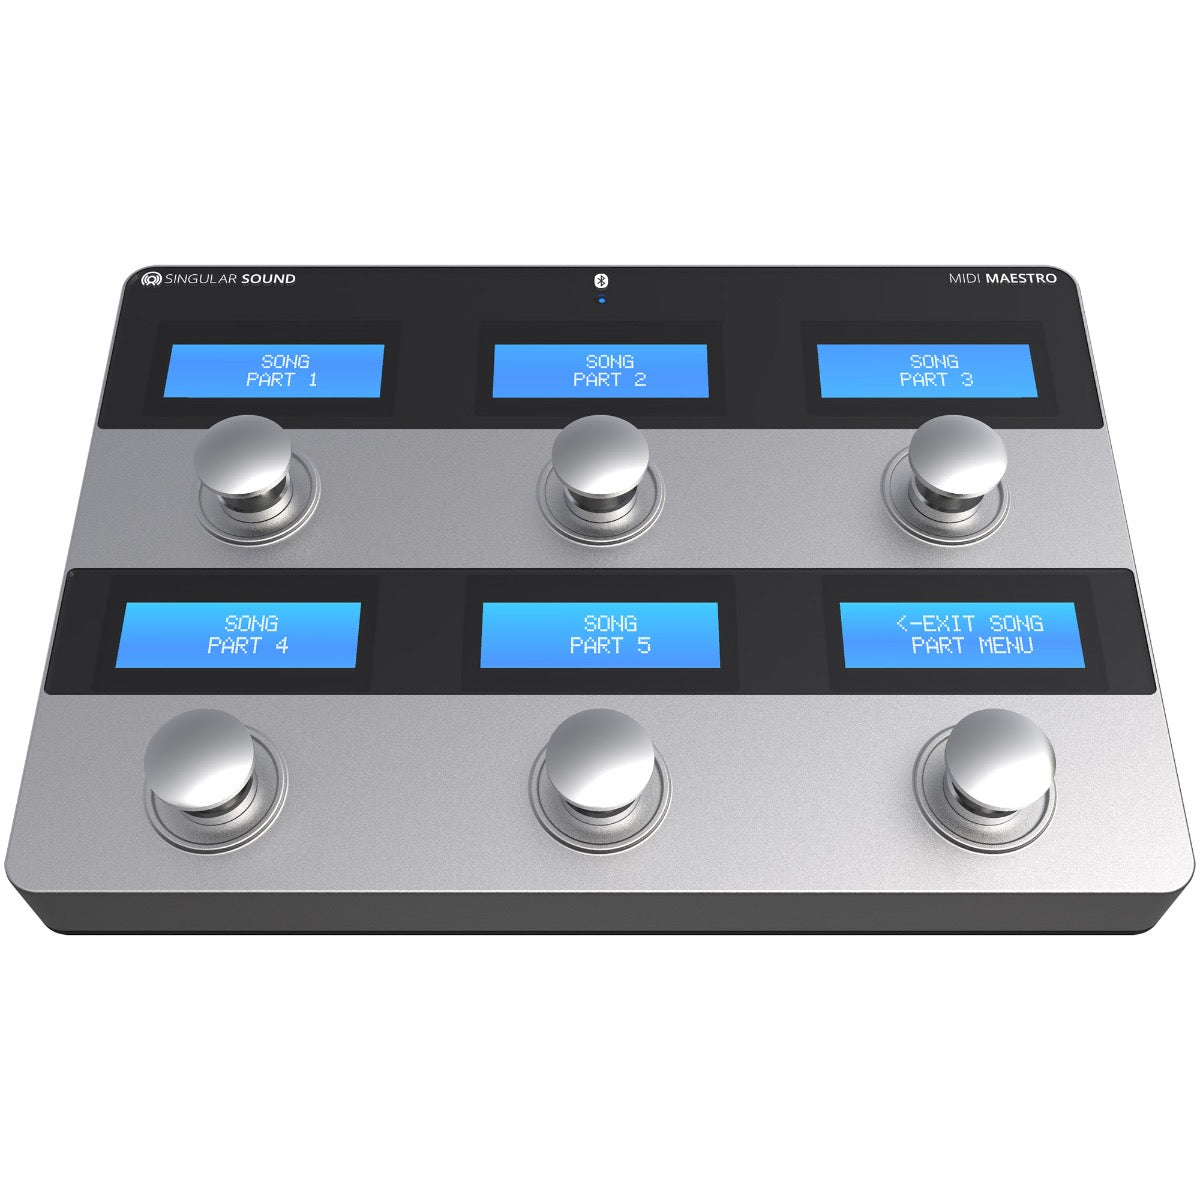 Top/front perspective view of Singular Sound MIDI Maestro 6-Button MIDI Footswitch Controller